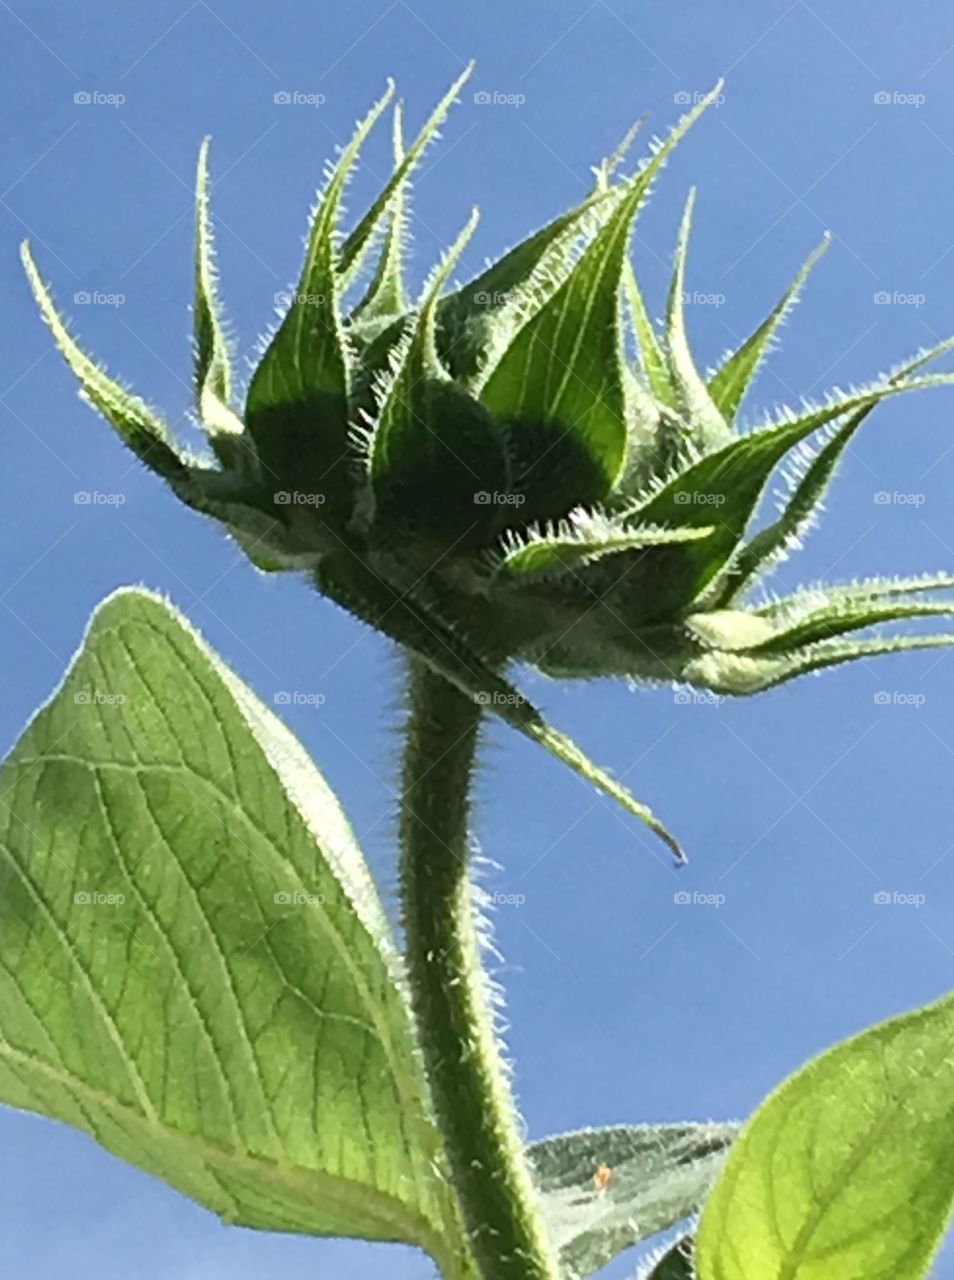 Unopened Sunflower Bud, Growing Up Up, Blue Sky! No Clouds! 🌻